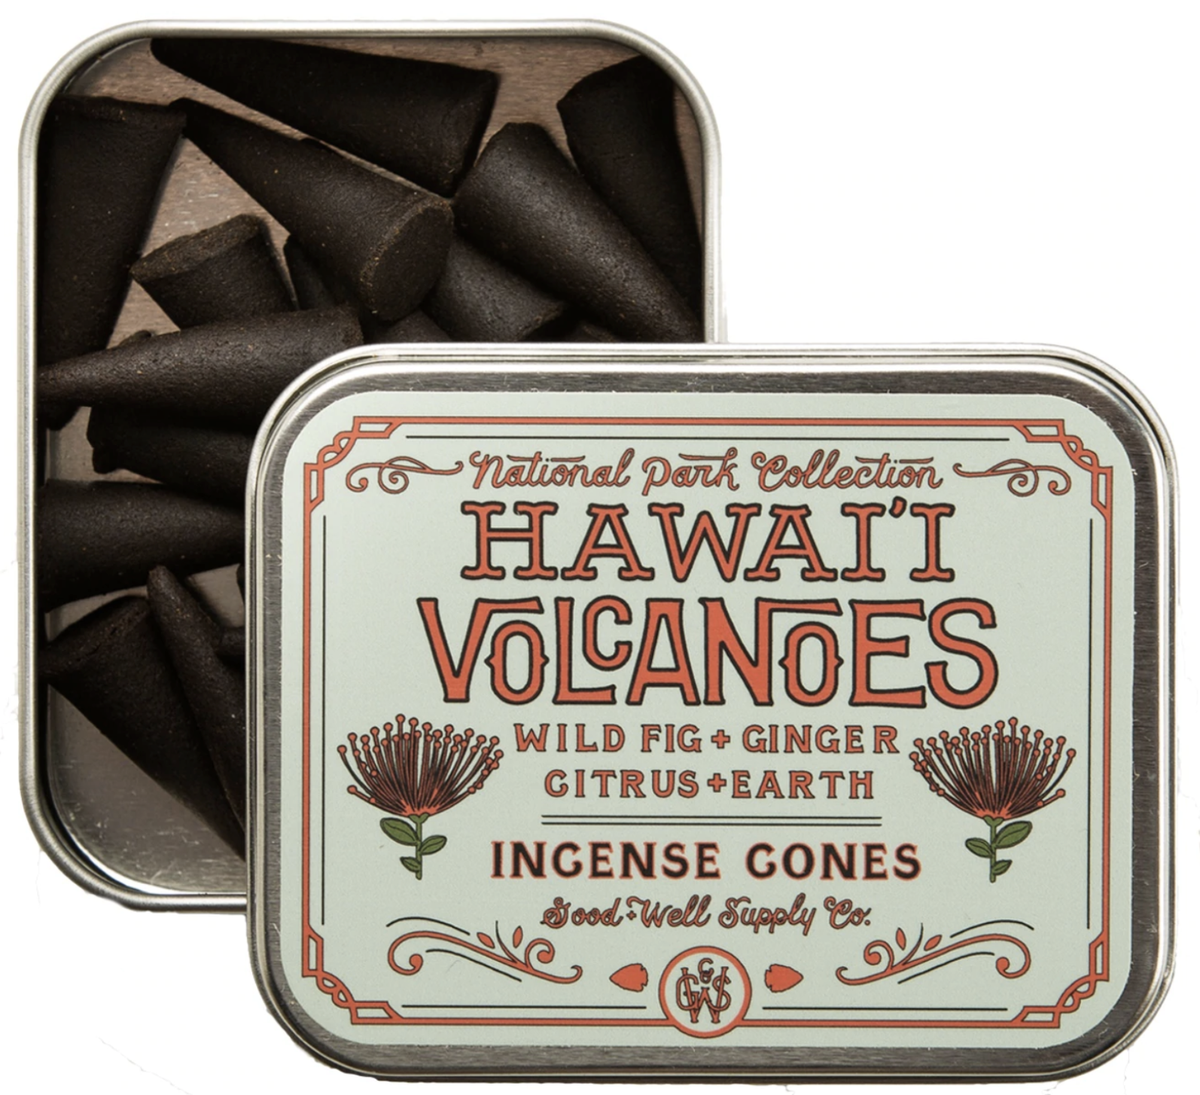 Good &amp; Well Supply Co: Hawaii Incense - wild fig, ginger &amp; citrus